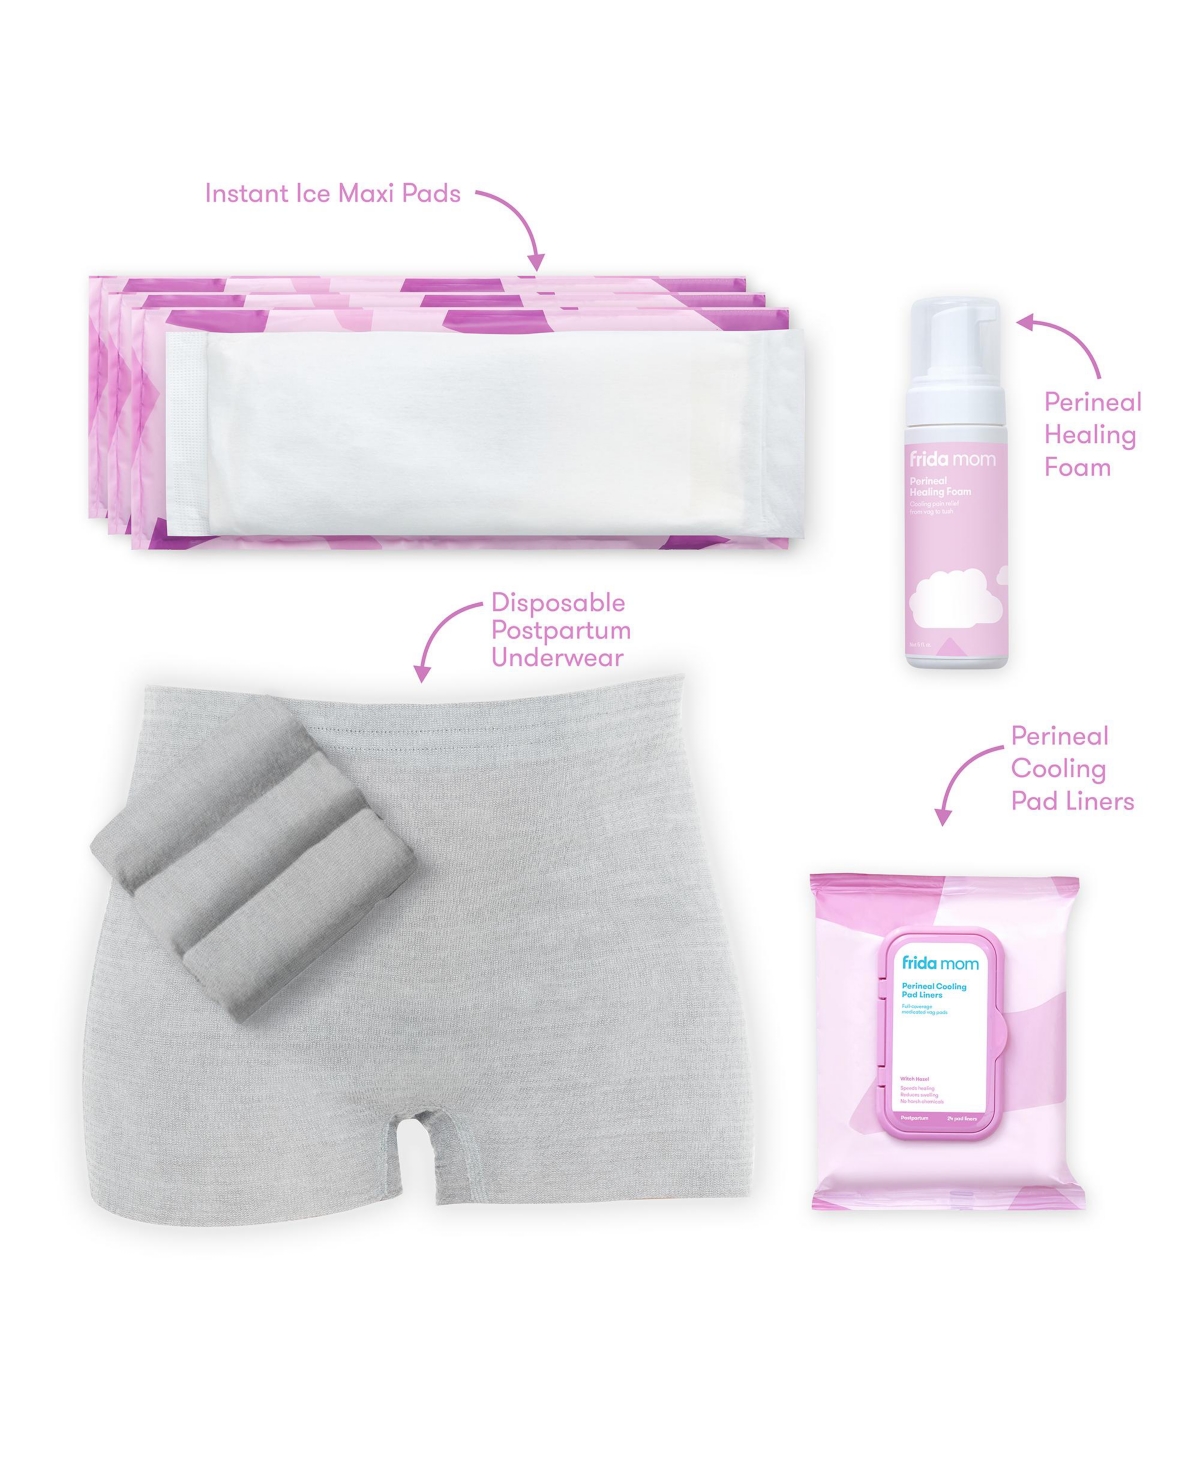 Shop Frida Baby Mom Postpartum Recovery Essentials Kit In Pink